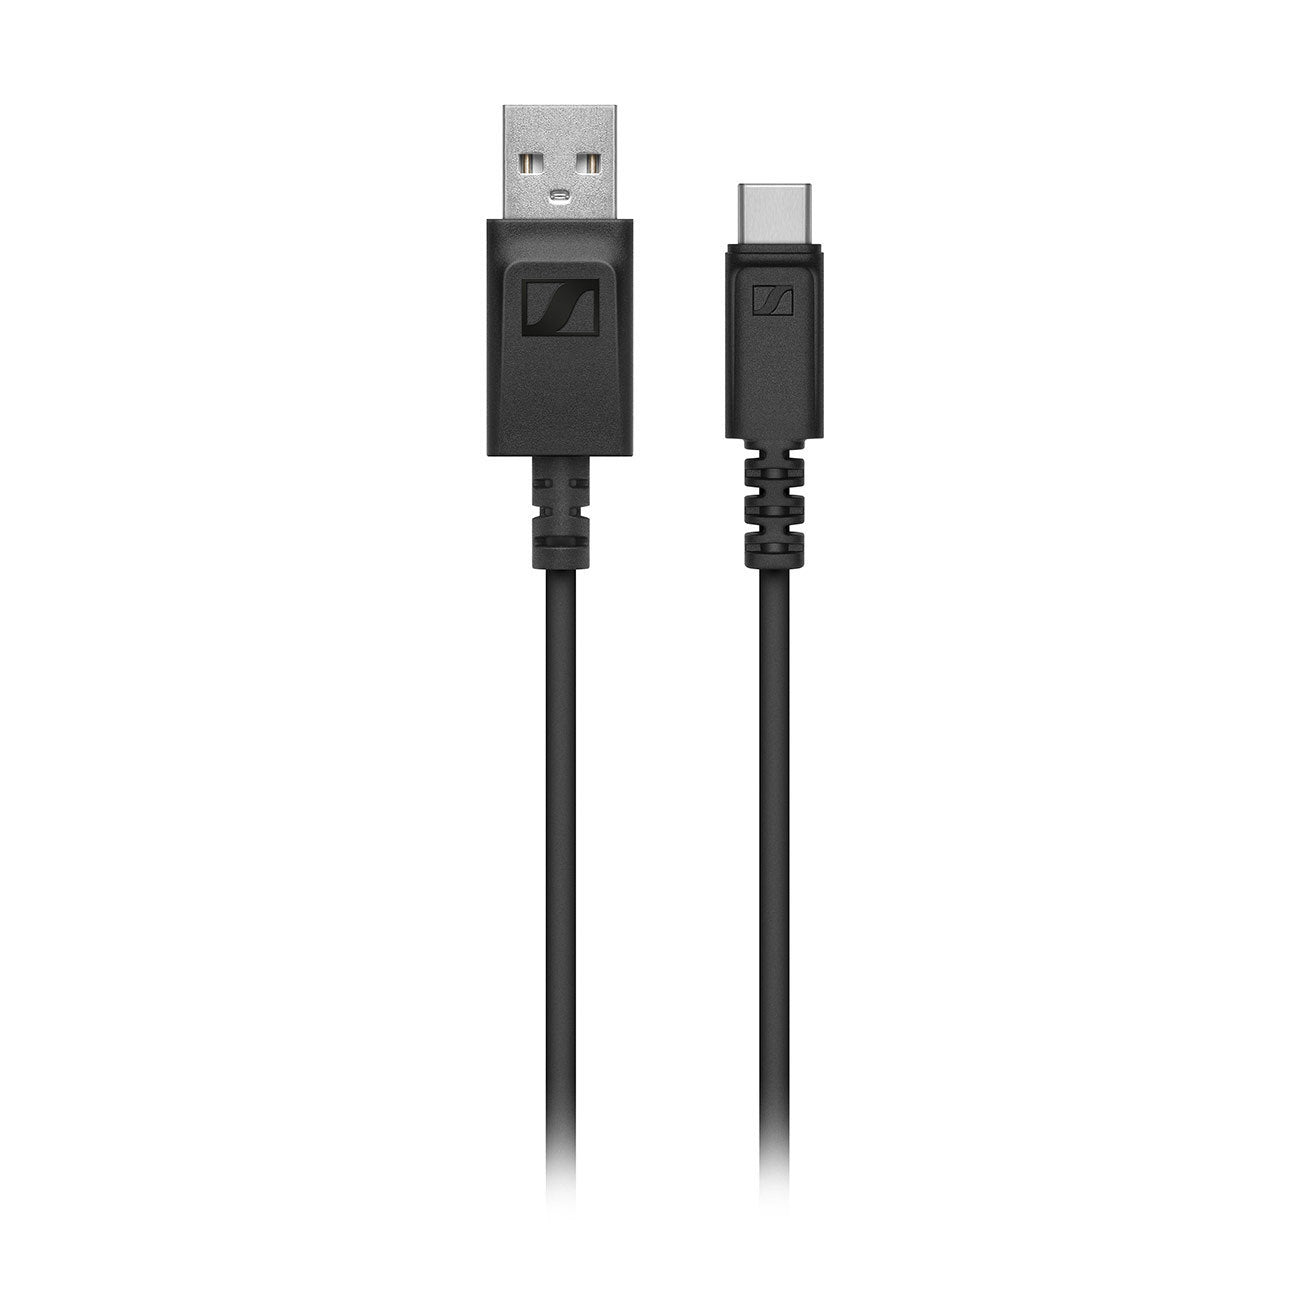 Sennheiser XS Wireless Digital - XSW-D Vocal Set, USB-A to USB-C charging cable